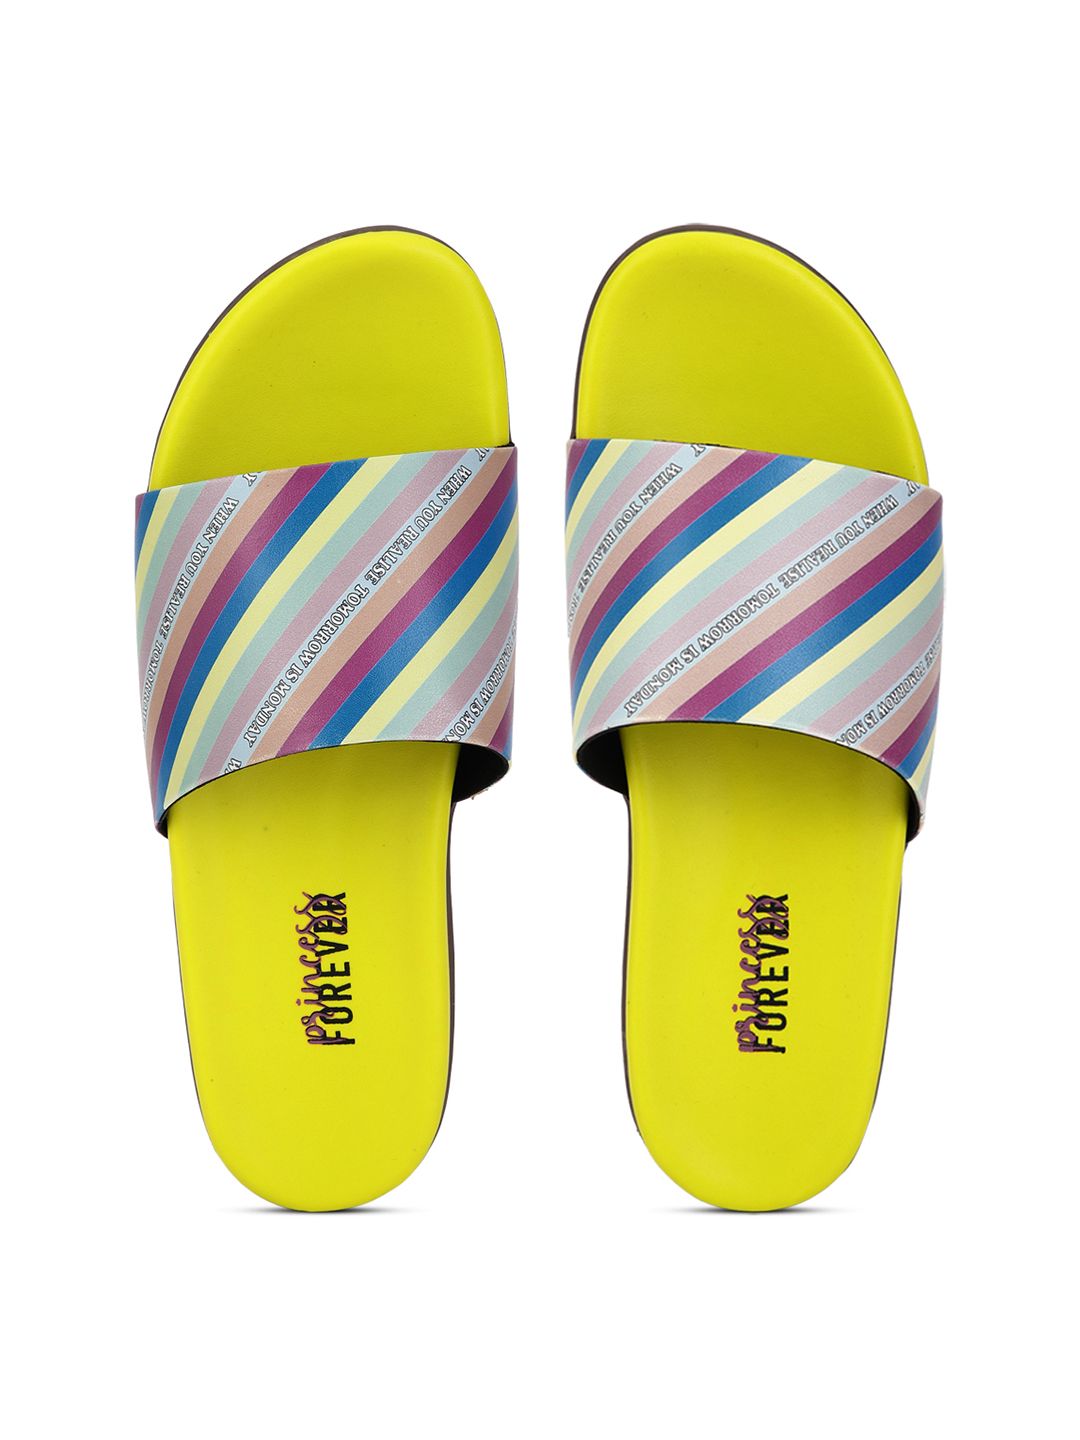 FOREVER 21 Women Fluorescent Green & Grey Striped Sliders Price in India